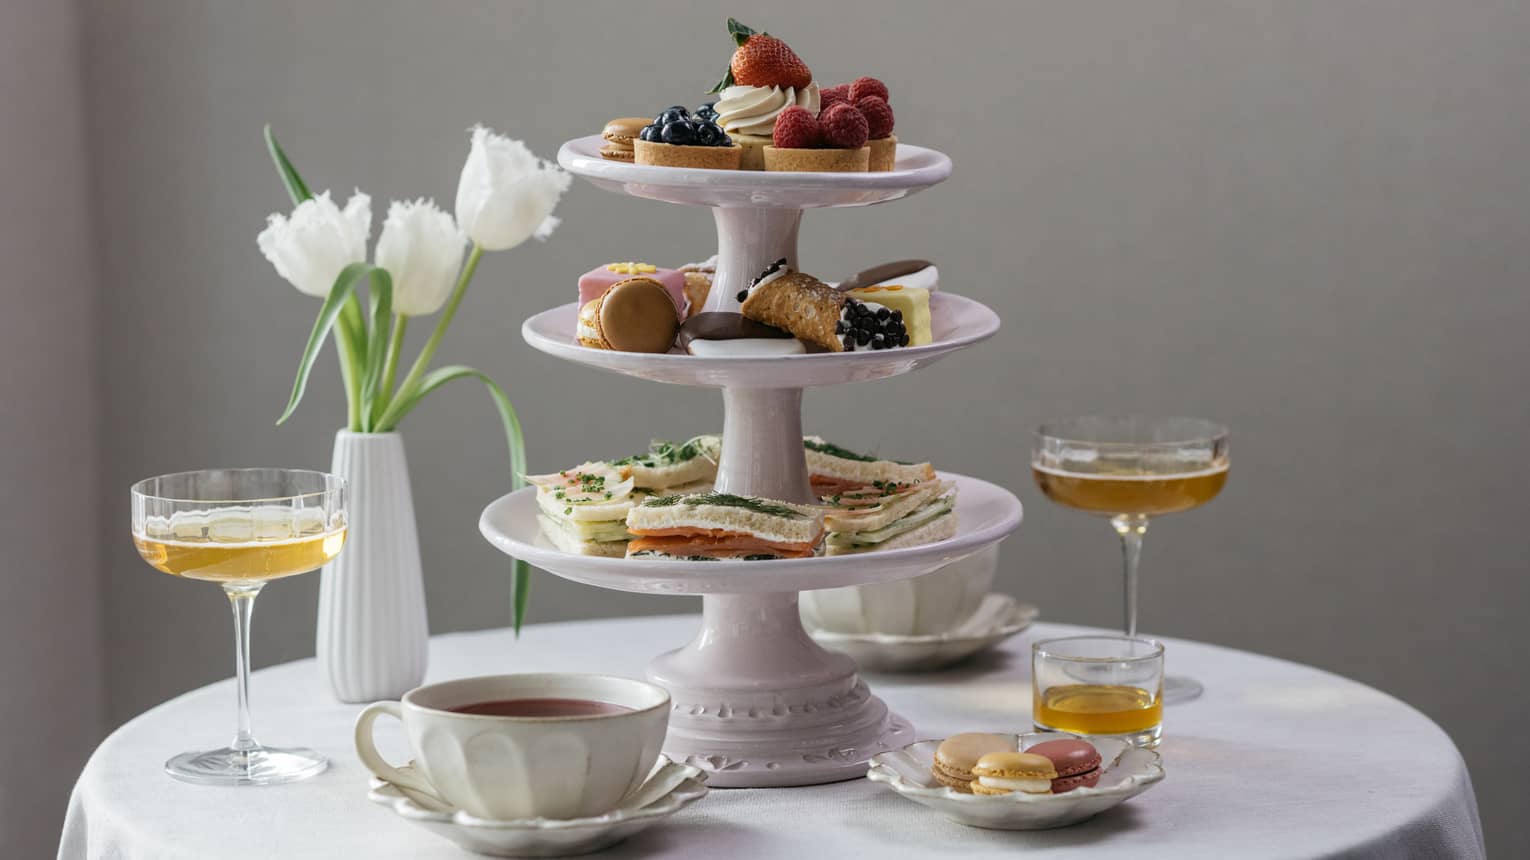 Afternoon tea setting, three-tiered dessert tray, tulips in vase, martinis and tea cups